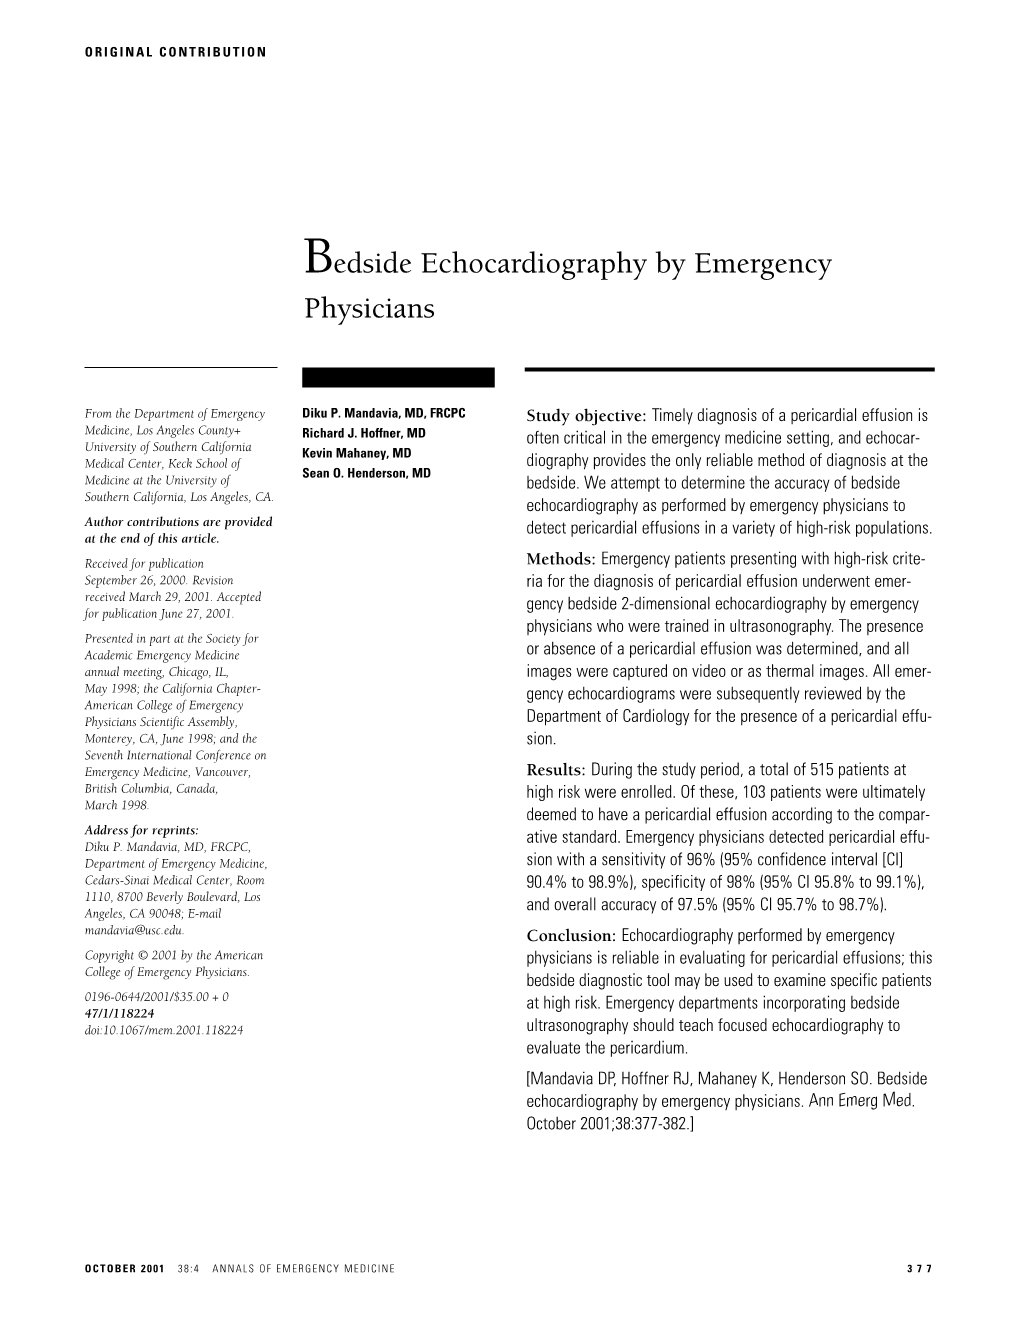 Bedside Echocardiography by Emergency Physicians